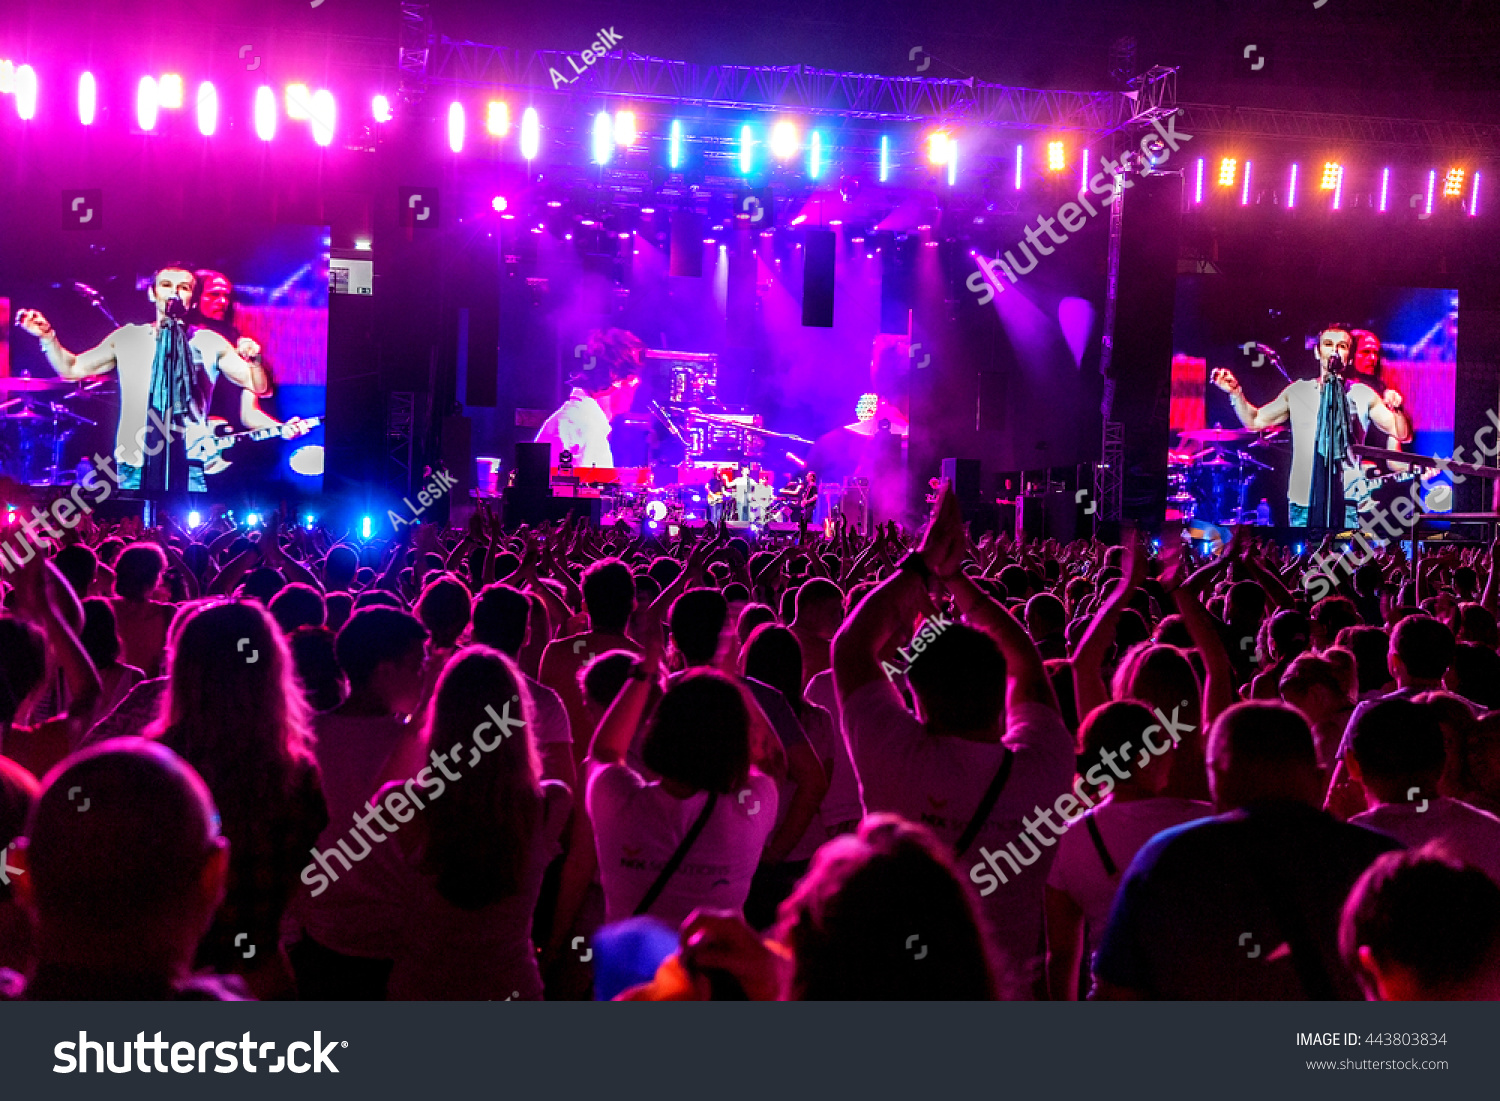 Odessa, Ukraine - June 25, 2016: Large crowd of spectators having fun at stadium, at concert of Ukrainian group Ocean Elzy during creative light and music show. Cheerful bright show in party club #443803834